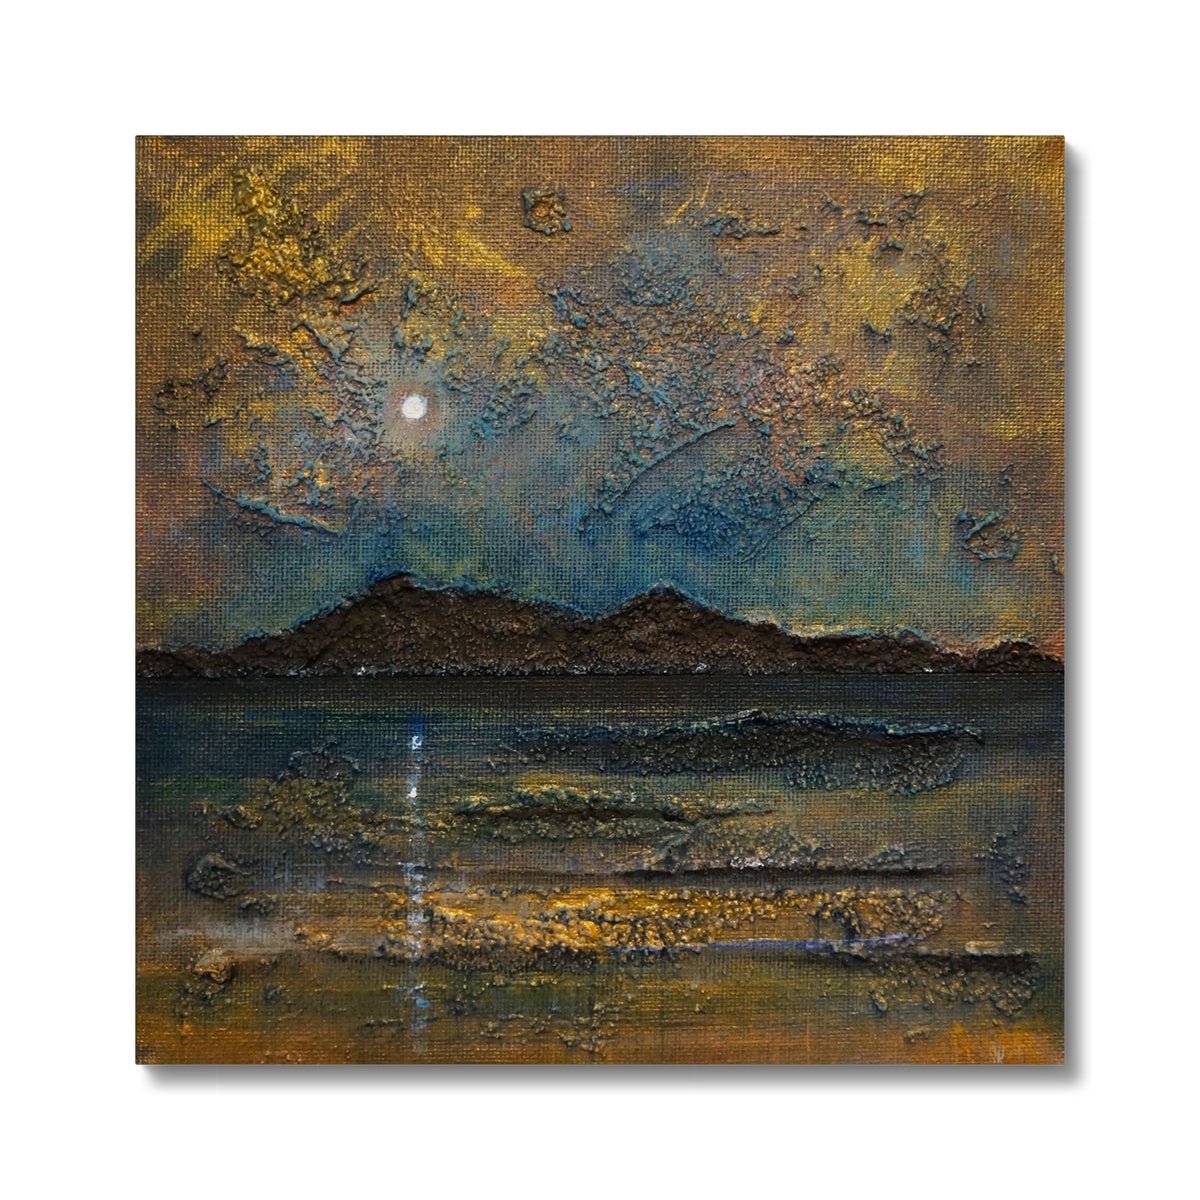 Arran Moonlight Painting | Canvas From Scotland-Contemporary Stretched Canvas Prints-Arran Art Gallery-24"x24"-Paintings, Prints, Homeware, Art Gifts From Scotland By Scottish Artist Kevin Hunter